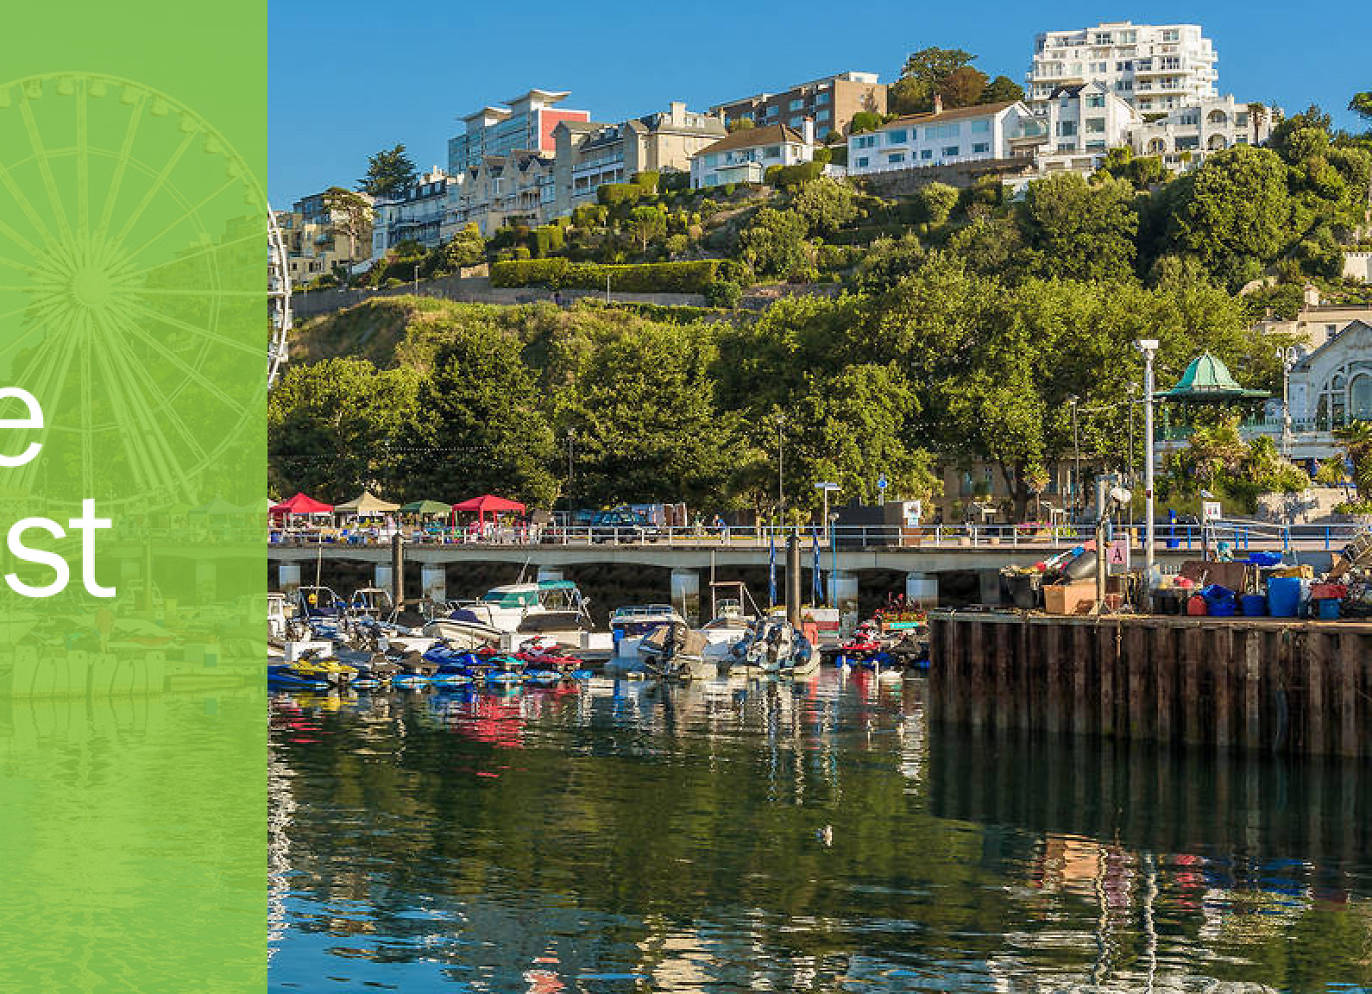 Torquay 2022 | Ultimate Guide To Where To Go, Eat & Sleep in Torquay